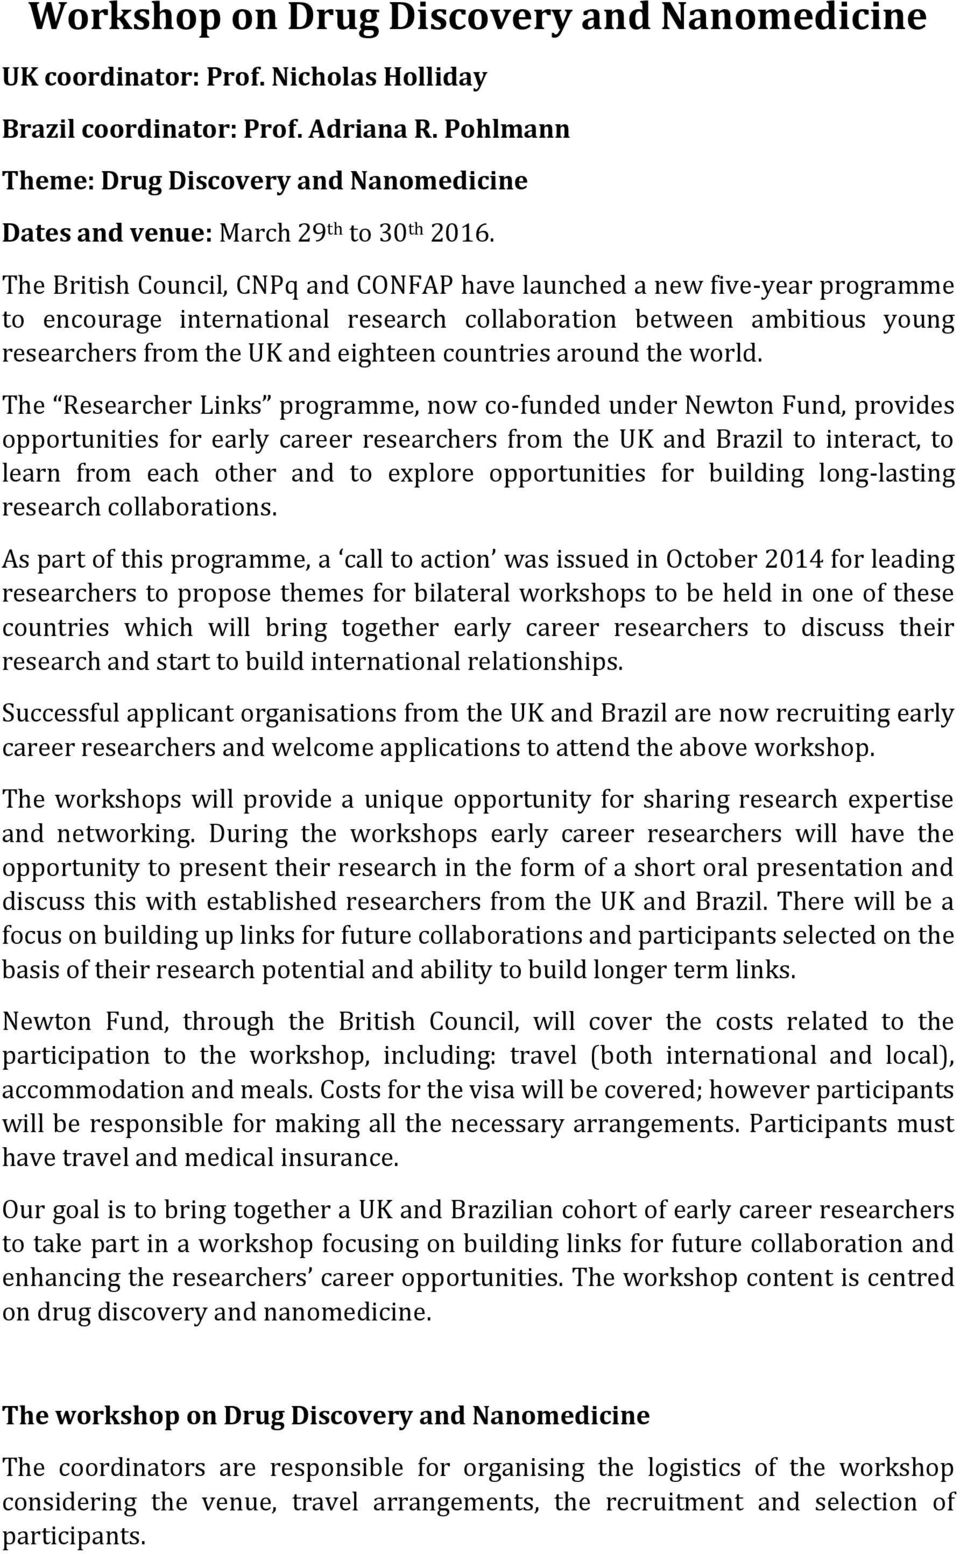 The British Council, CNPq and CONFAP have launched a new five-year programme to encourage international research collaboration between ambitious young researchers from the UK and eighteen countries